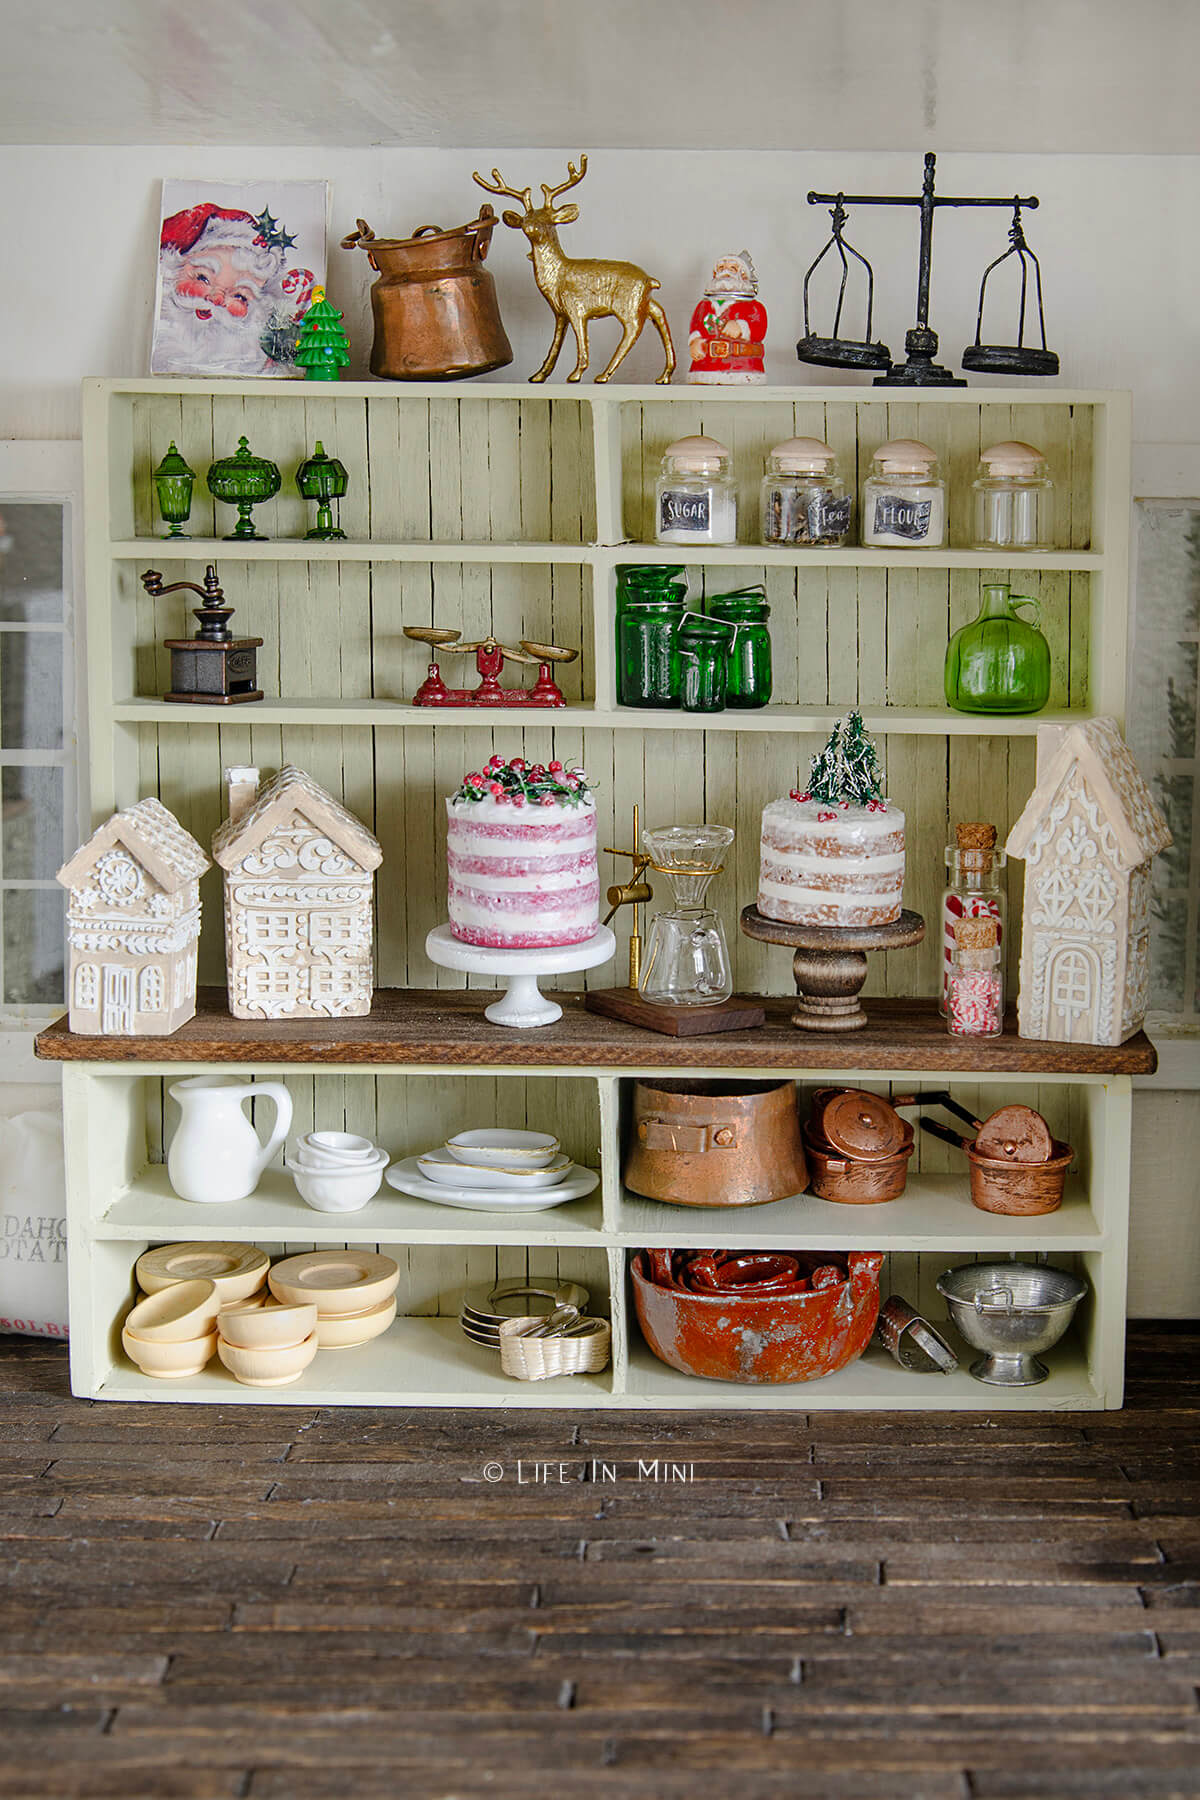 A large shelf unit in a dollhouse filled with Christmas cakes, gingerbread houses and kitchen stuff